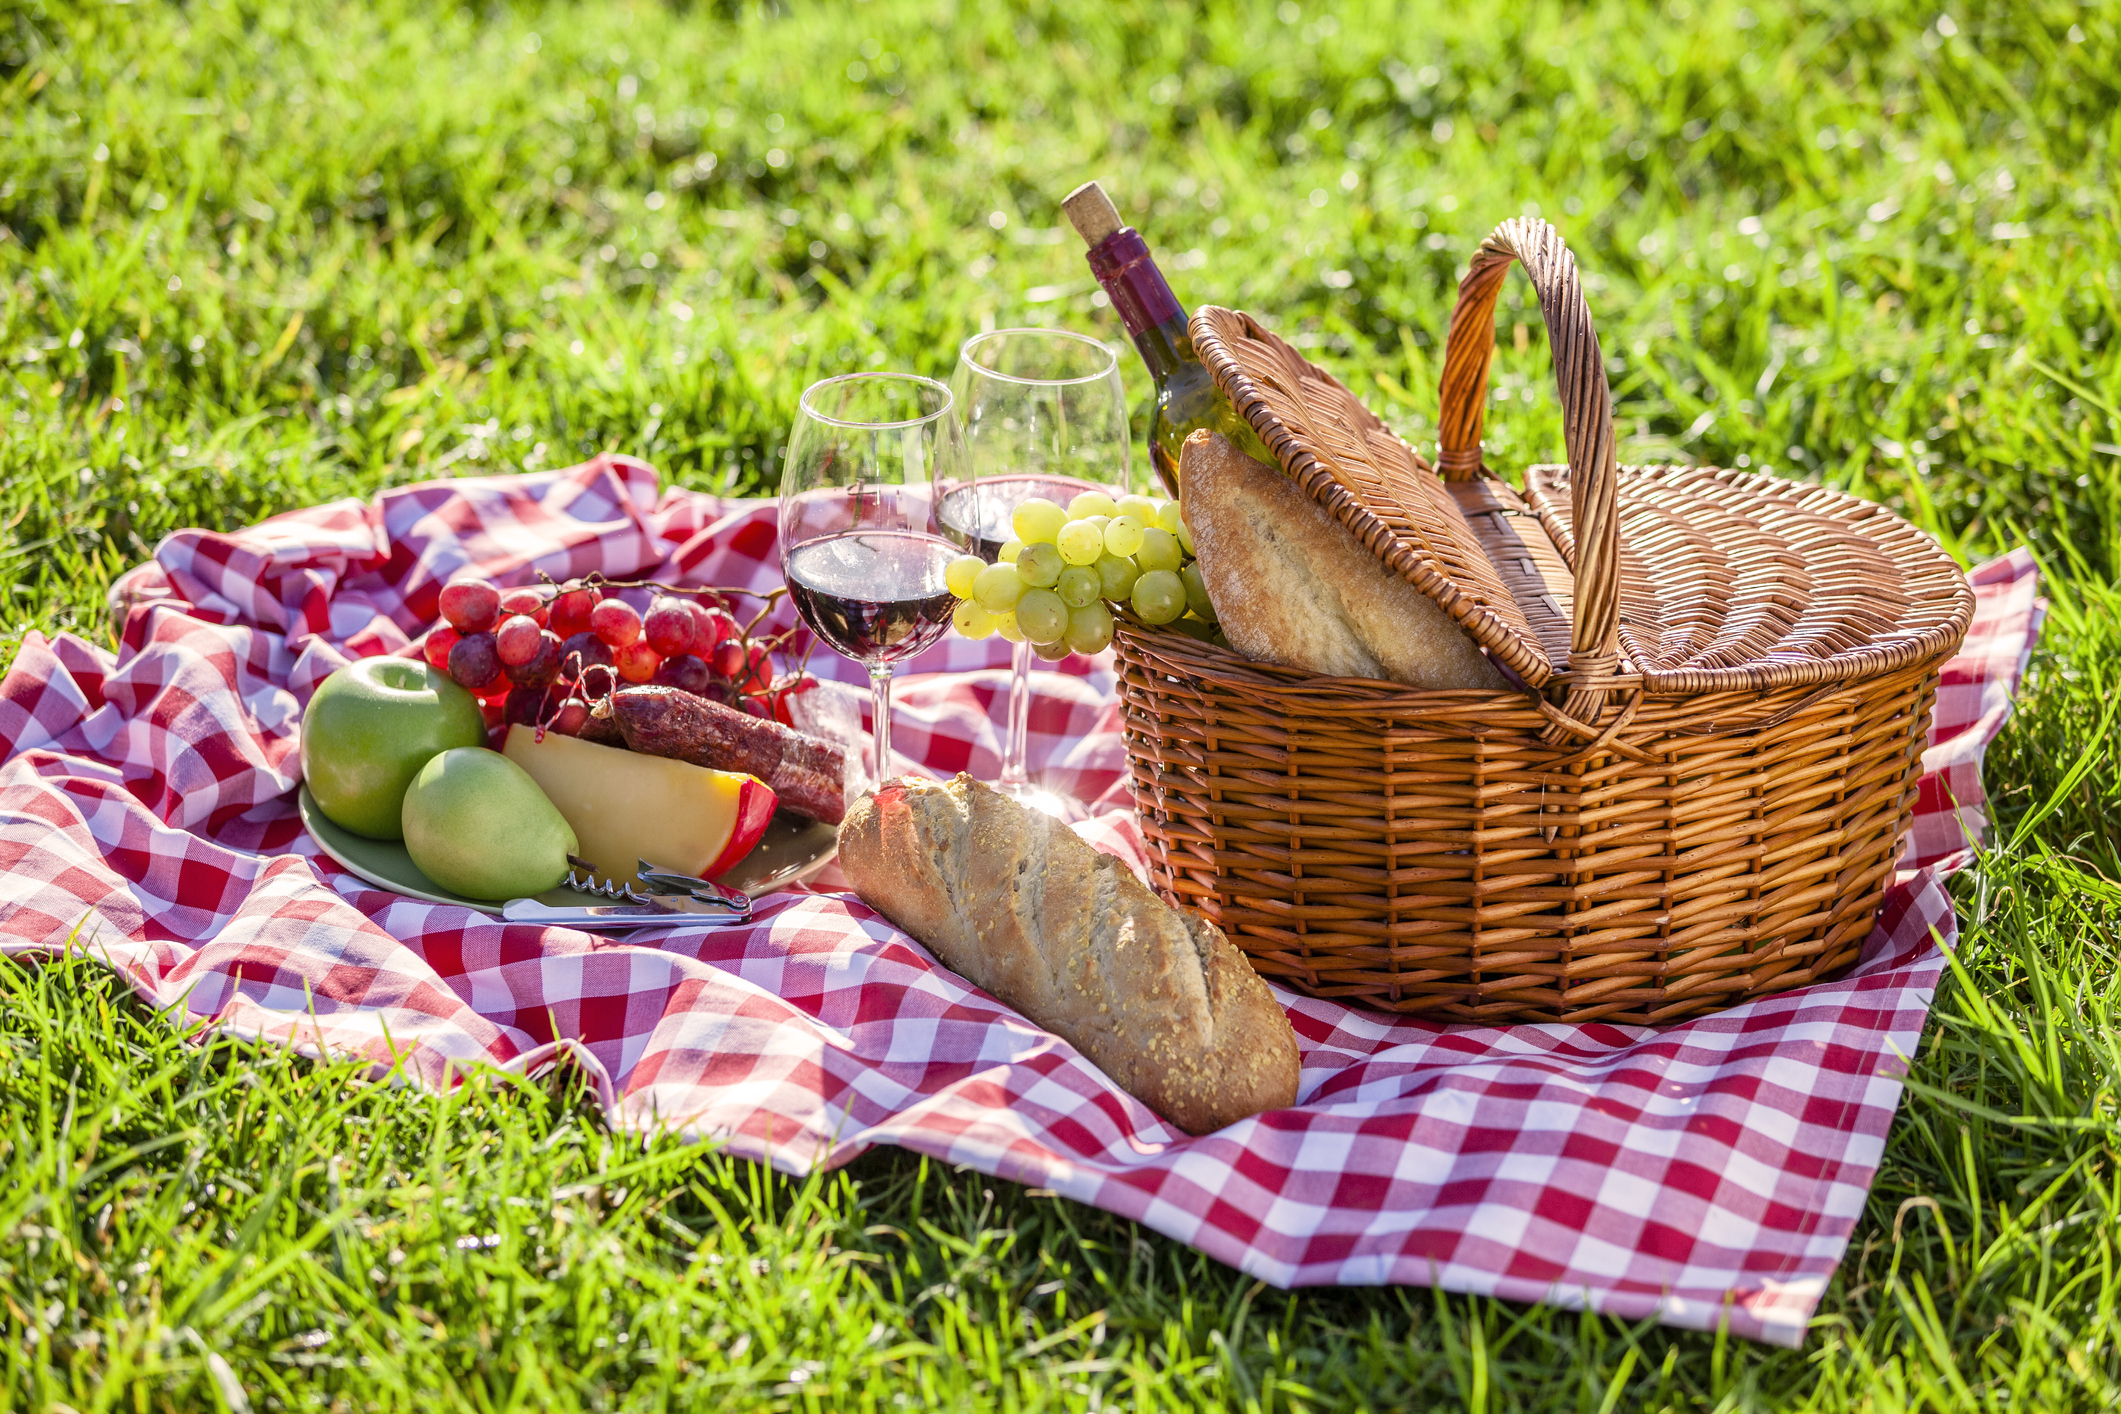 Three quarters front view of a picnic basket shot on a checkered tablecloth on grass outdoors. Predominant colors are brown, red and green. The basket is filled with bread, cheese, grapes, and salami. Out of the basket are some fruits and a bottle and wineglass. High key DSRL outdoors photo taken with Canon EOS 5D Mk II and Canon EF 100mm f/2.8L Macro IS USM.